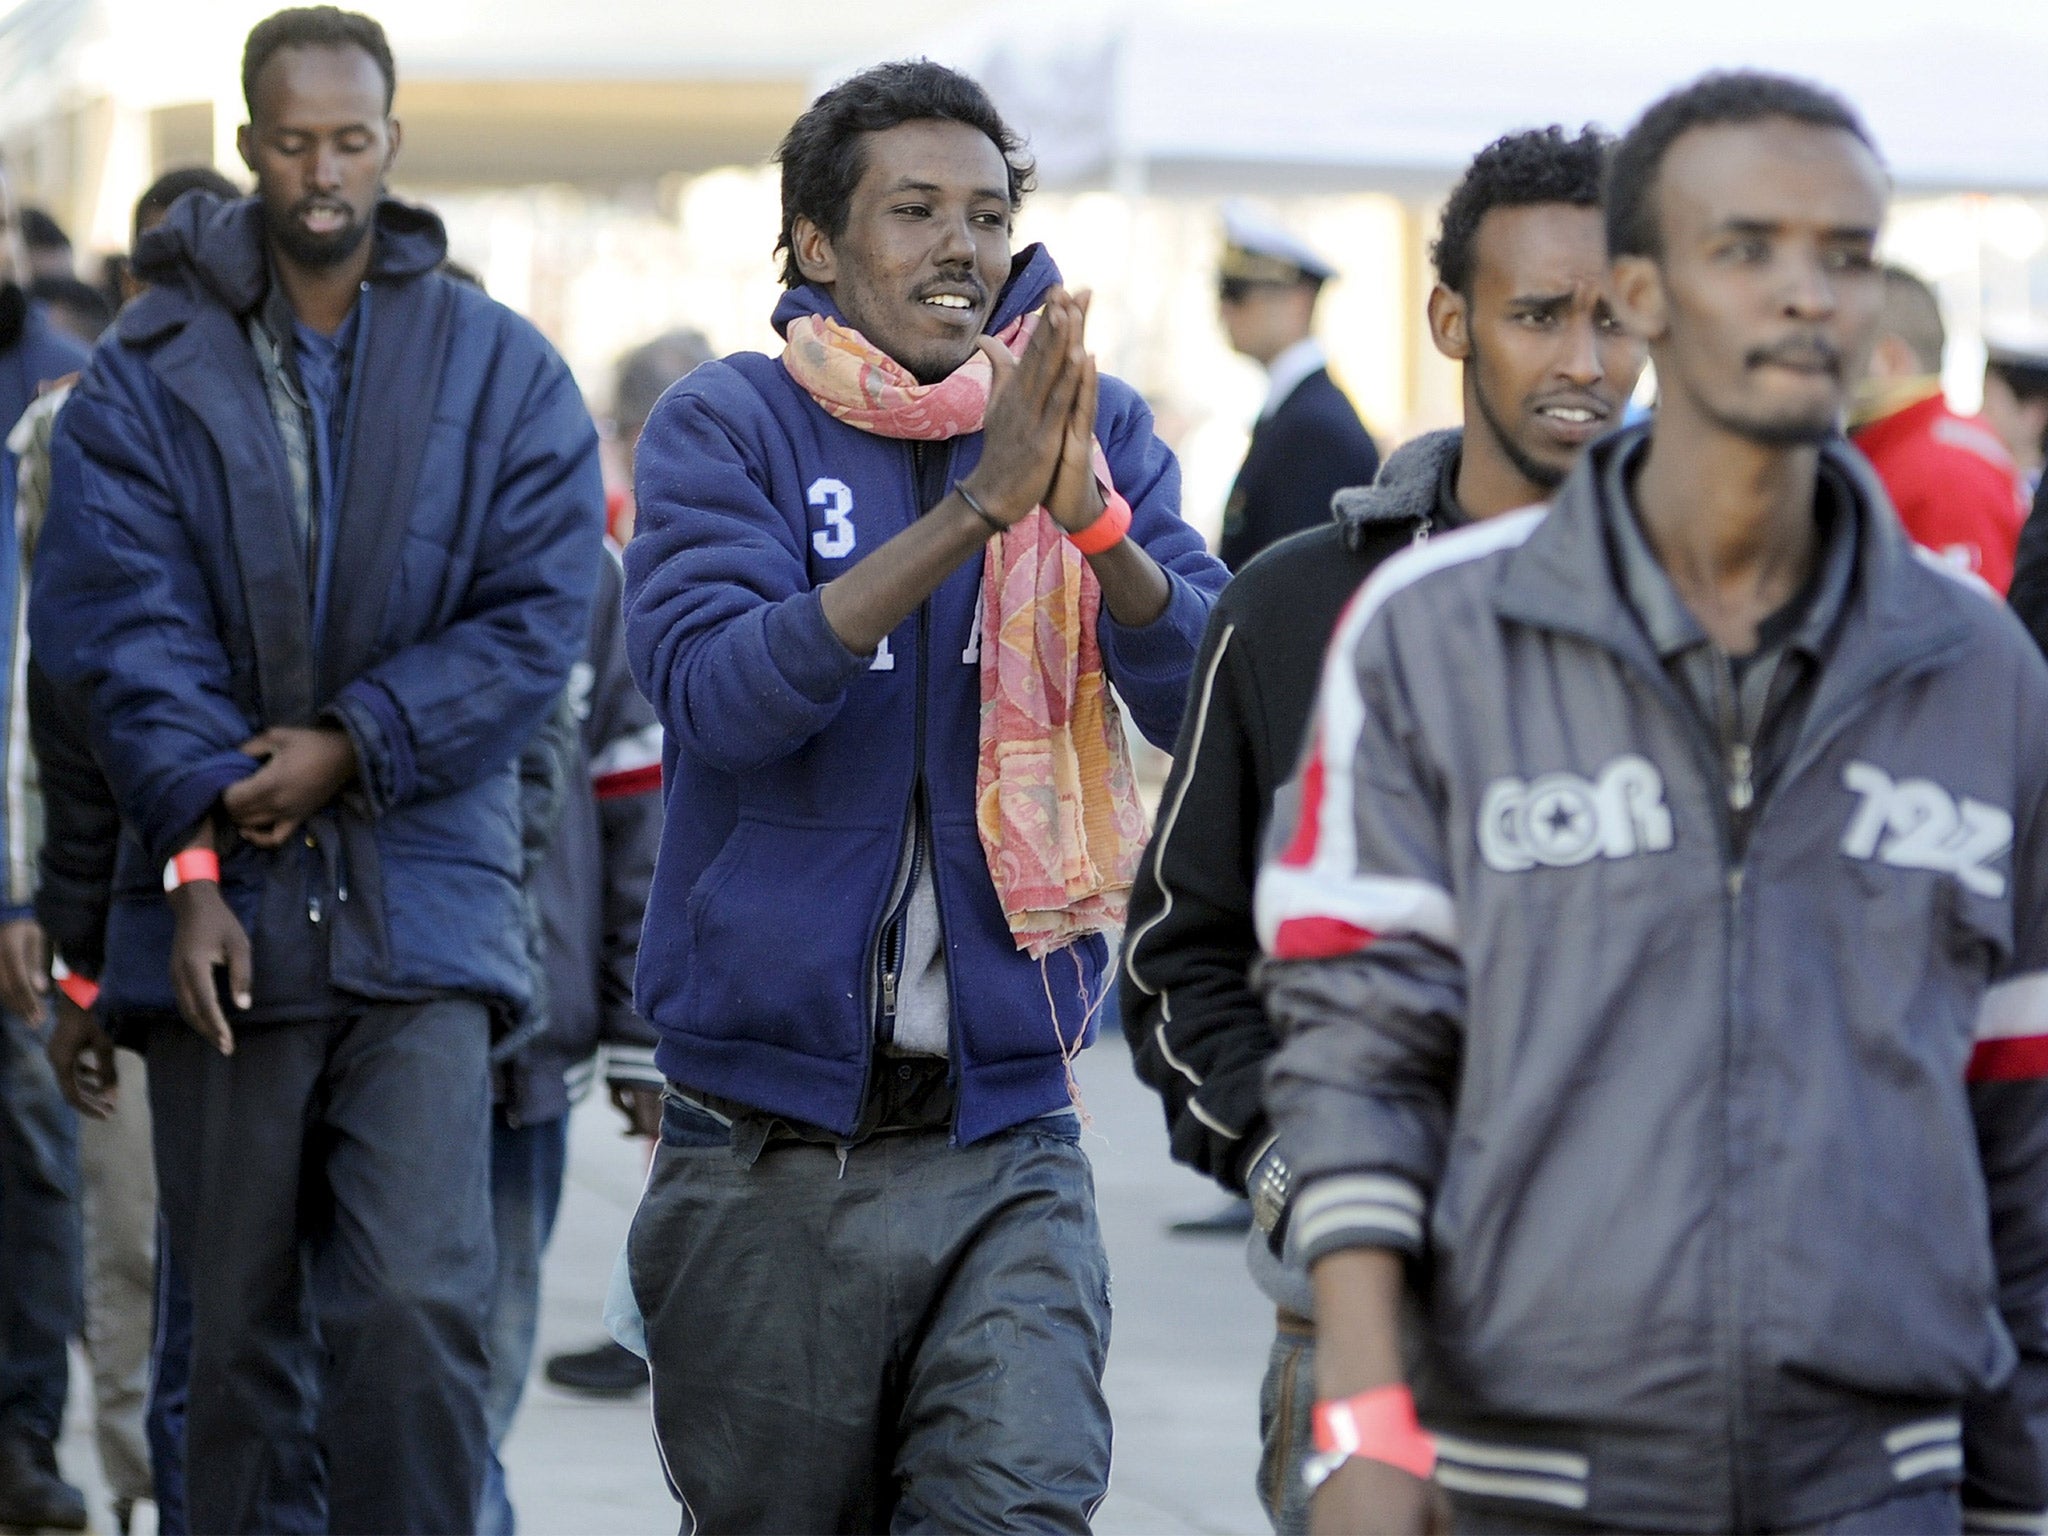 Migrants disembark from a merchant ship as they arrive in the Sicilian harbour of Palermo on Wednesday